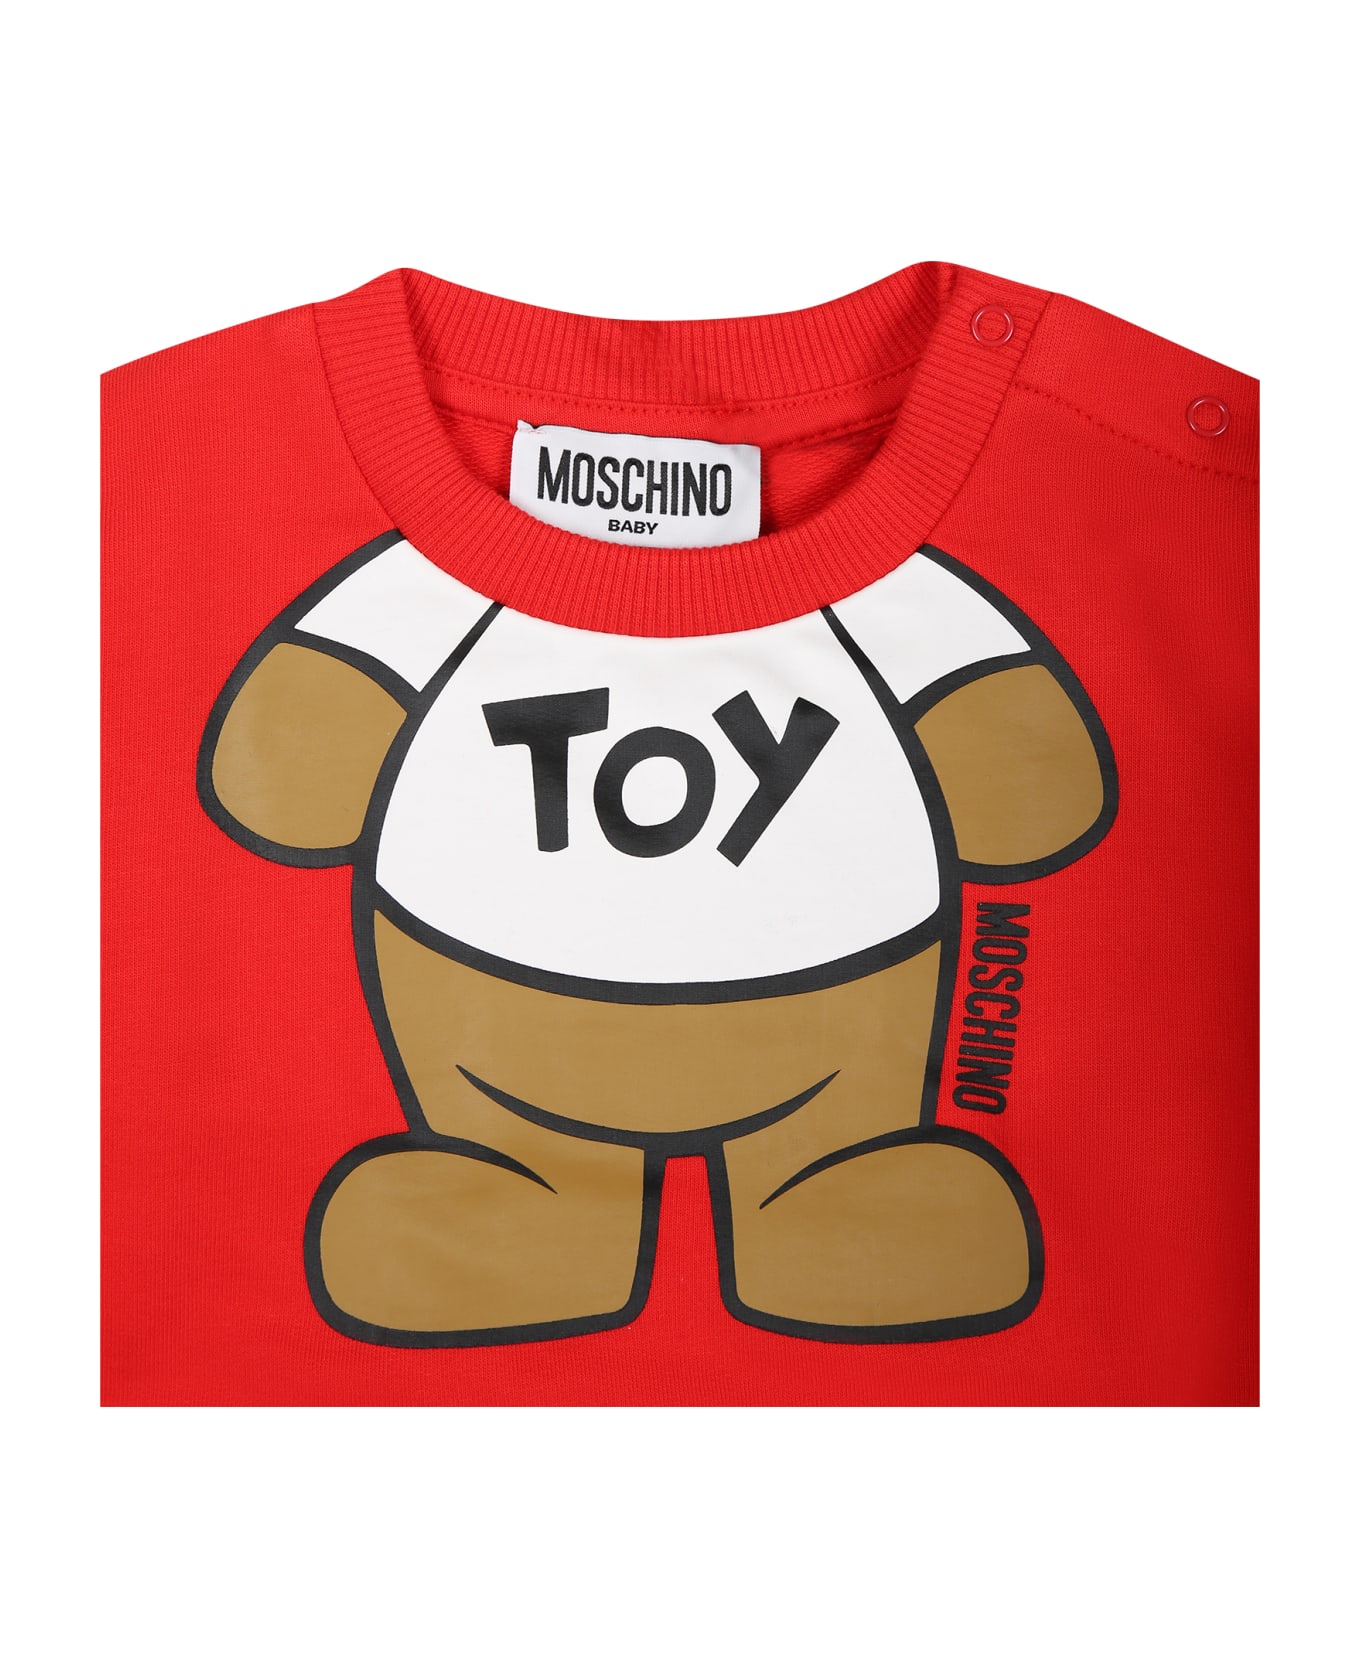 Moschino Red Sweatshirt For Babies With Teddy Bear - Red